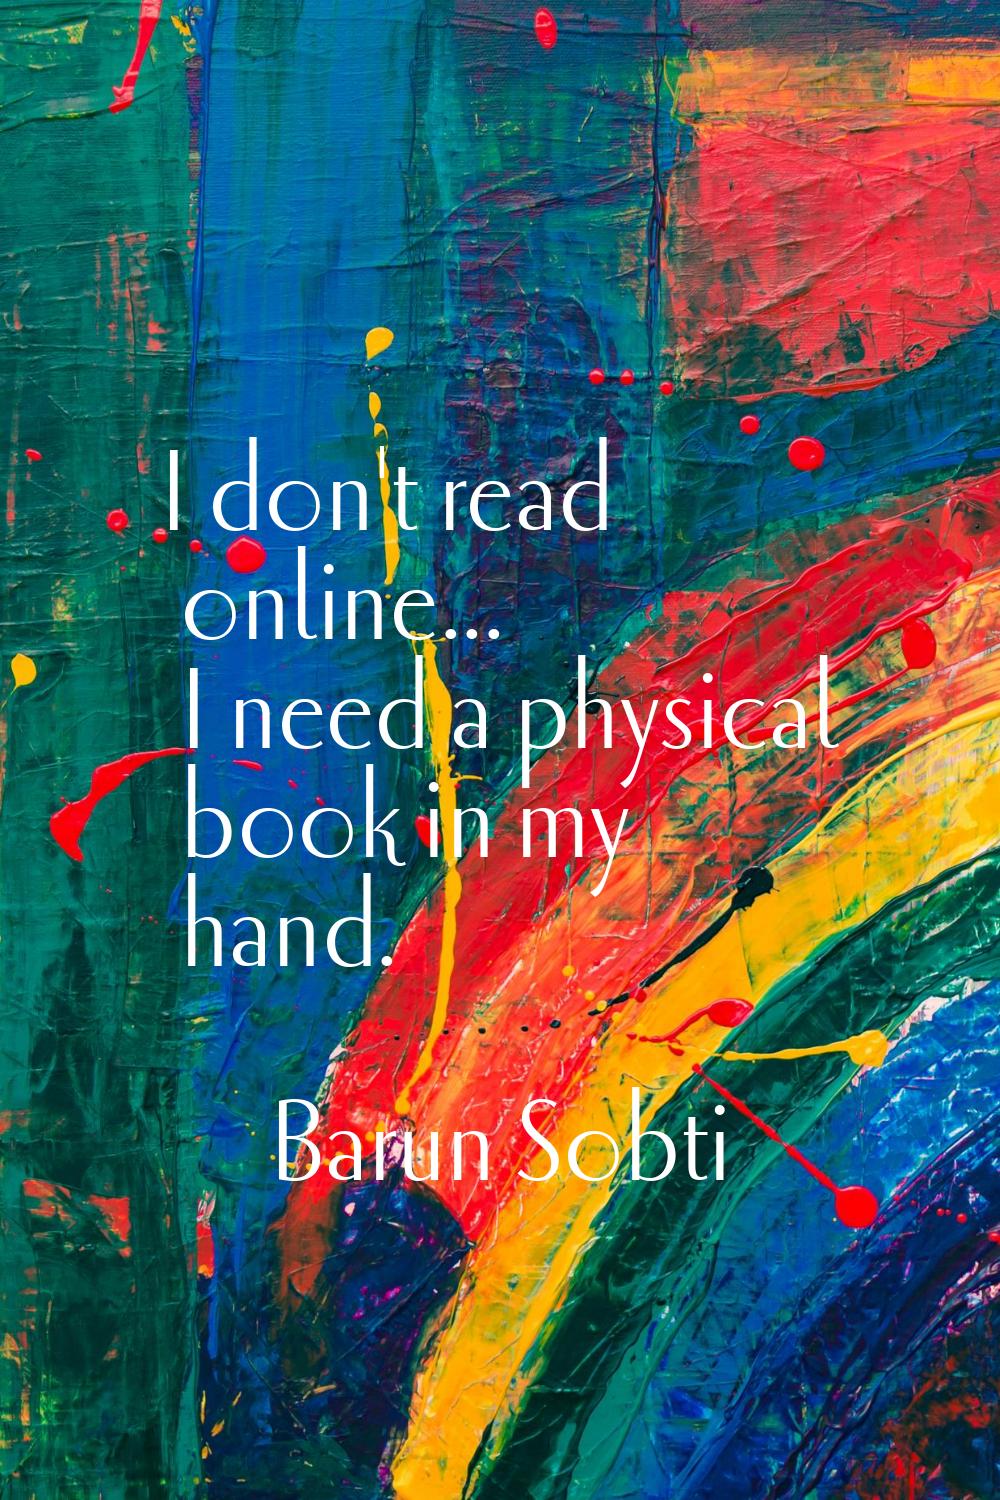 I don't read online... I need a physical book in my hand.